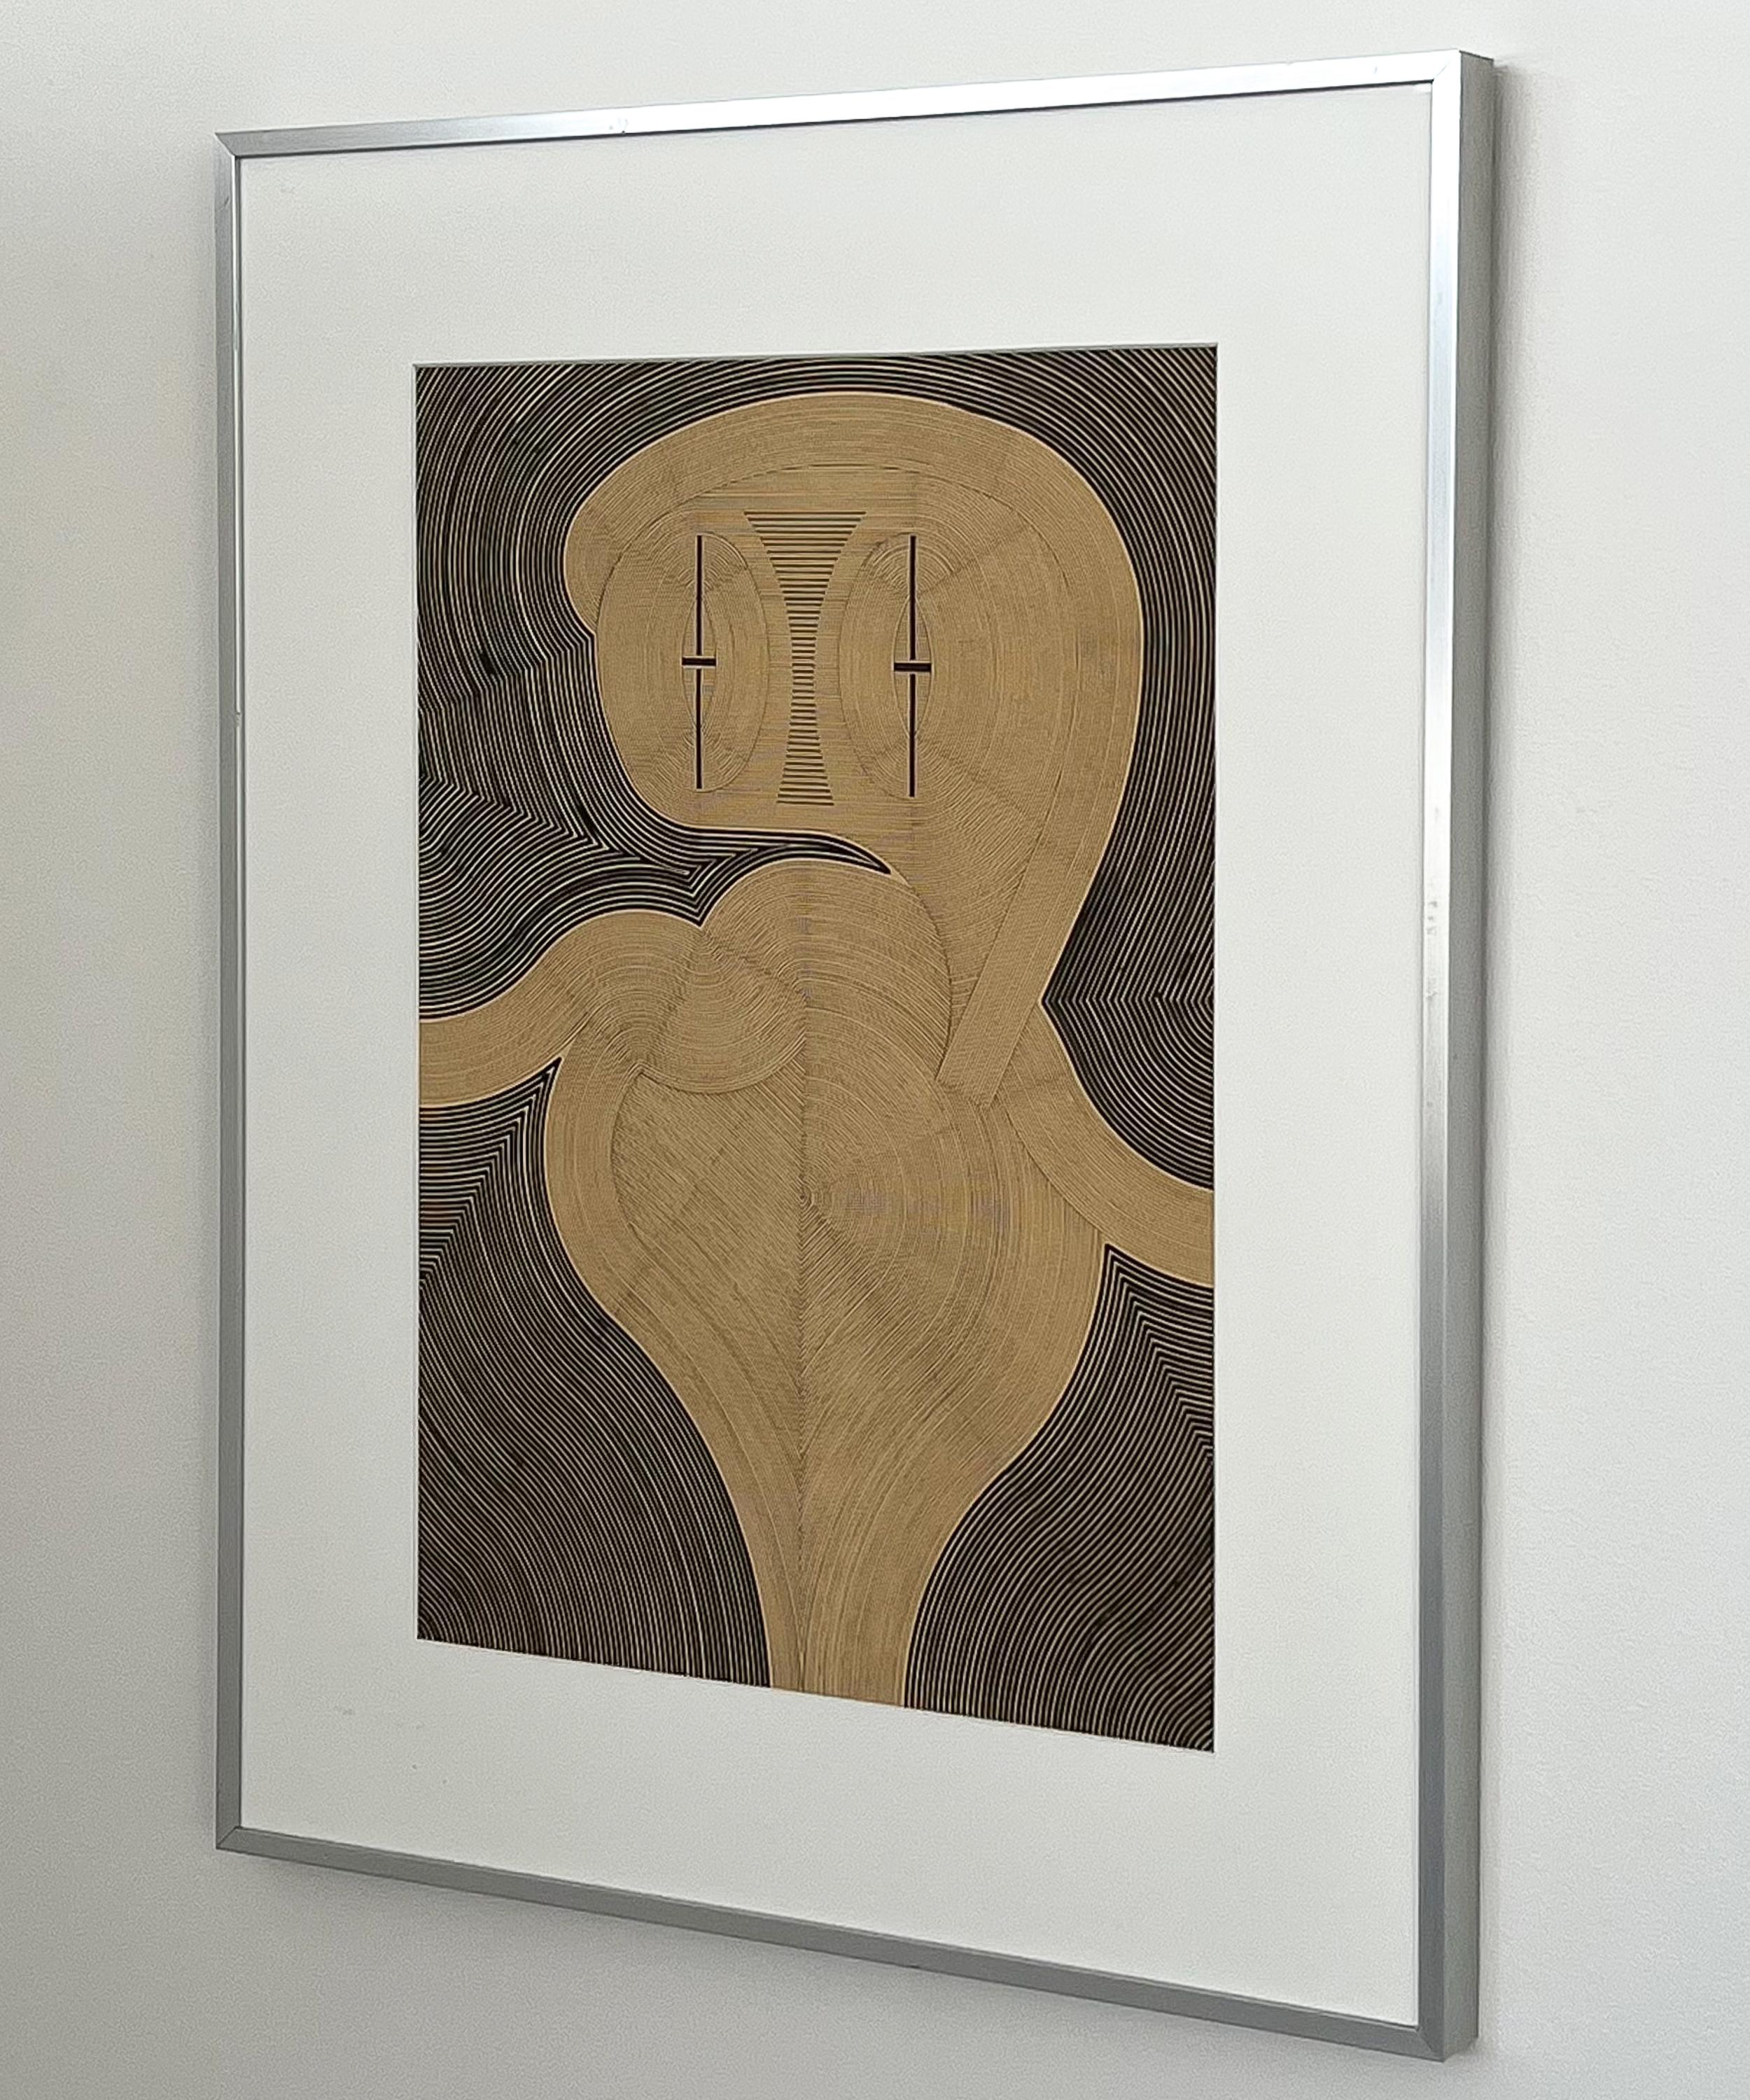 Pierre-Francois Vaysse framed modern abstract drawing, Belgium circa 1970. Intricate ink drawing on paper of abstract / surreal anthropomorphic figure. Black ink on beige background. Newly matted in white within the original aluminum frame behind